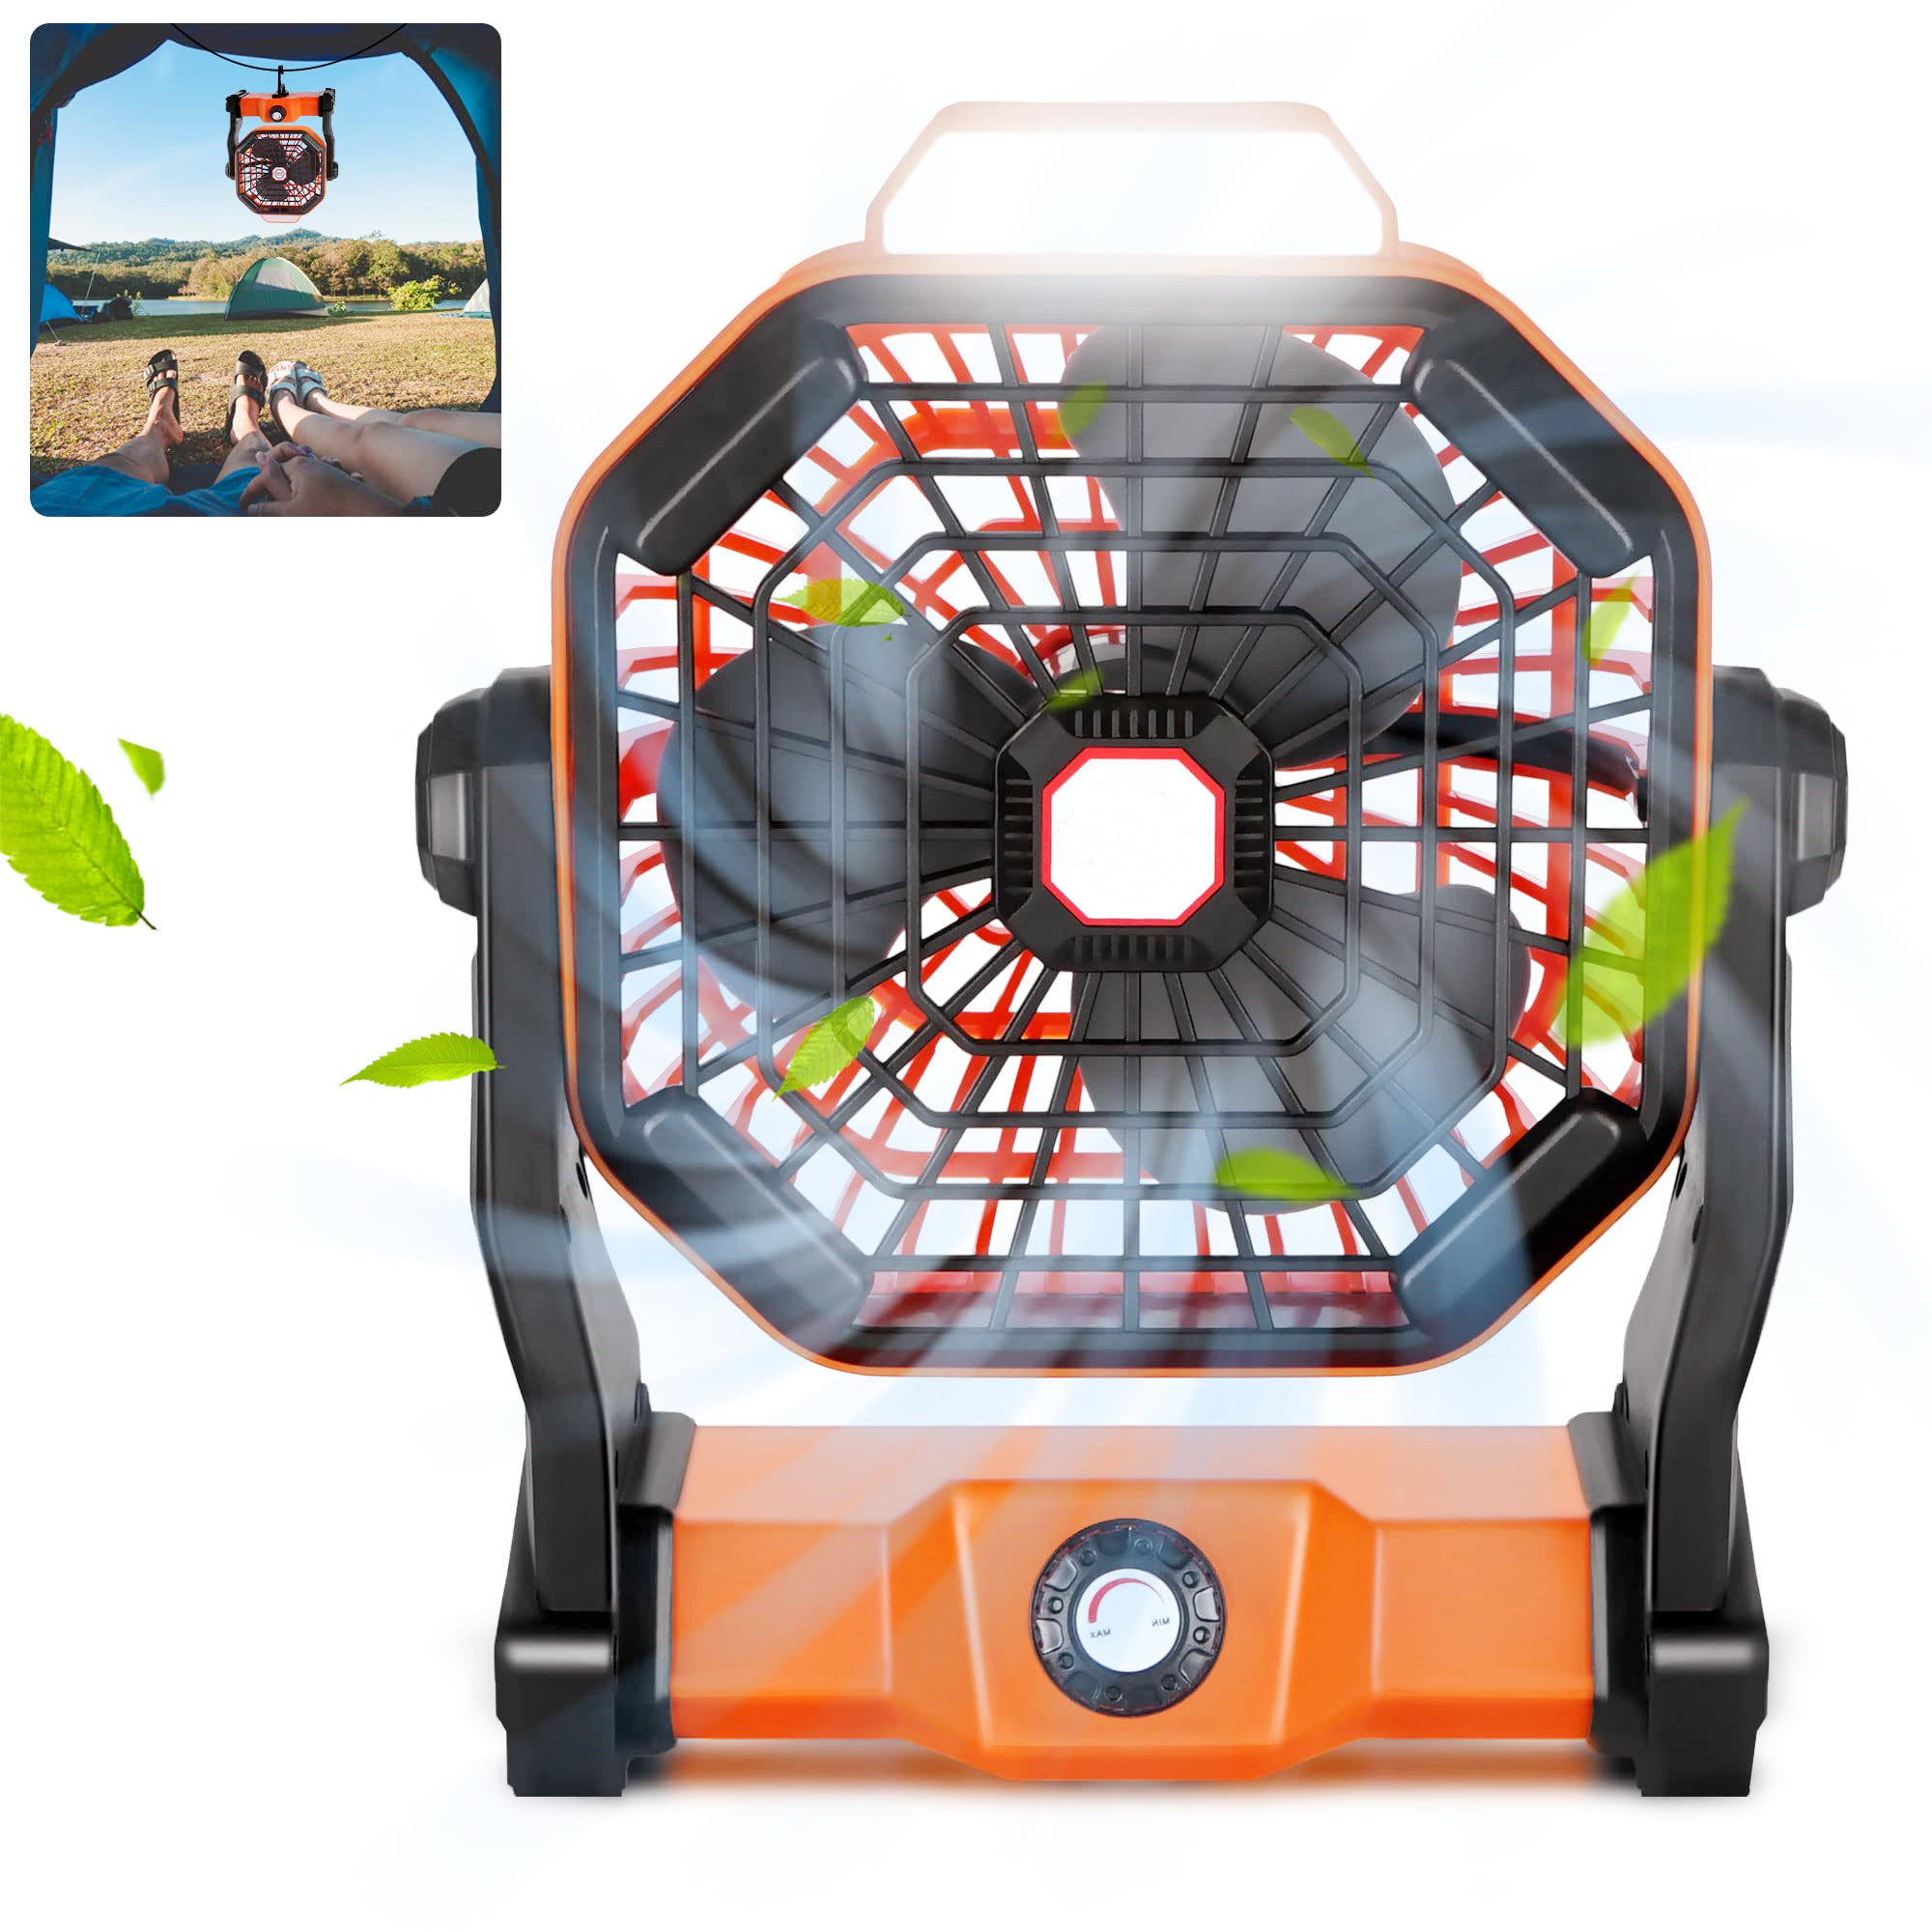 ESHOO Camping Fan With Led Lantern, 15000Mah Rechargeable Battery